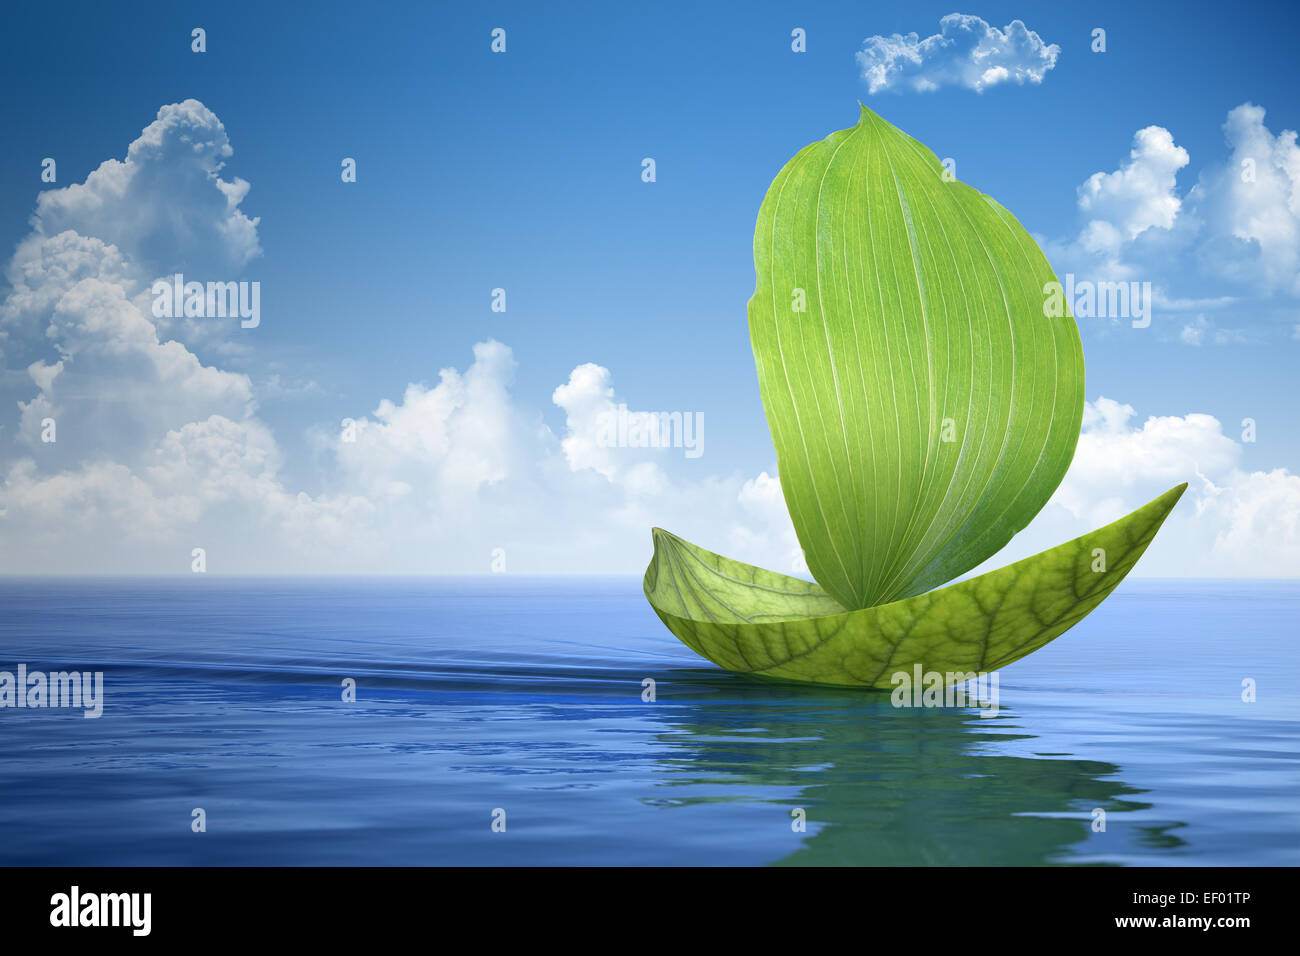 ship made of green leaves and floating on the water Stock Photo